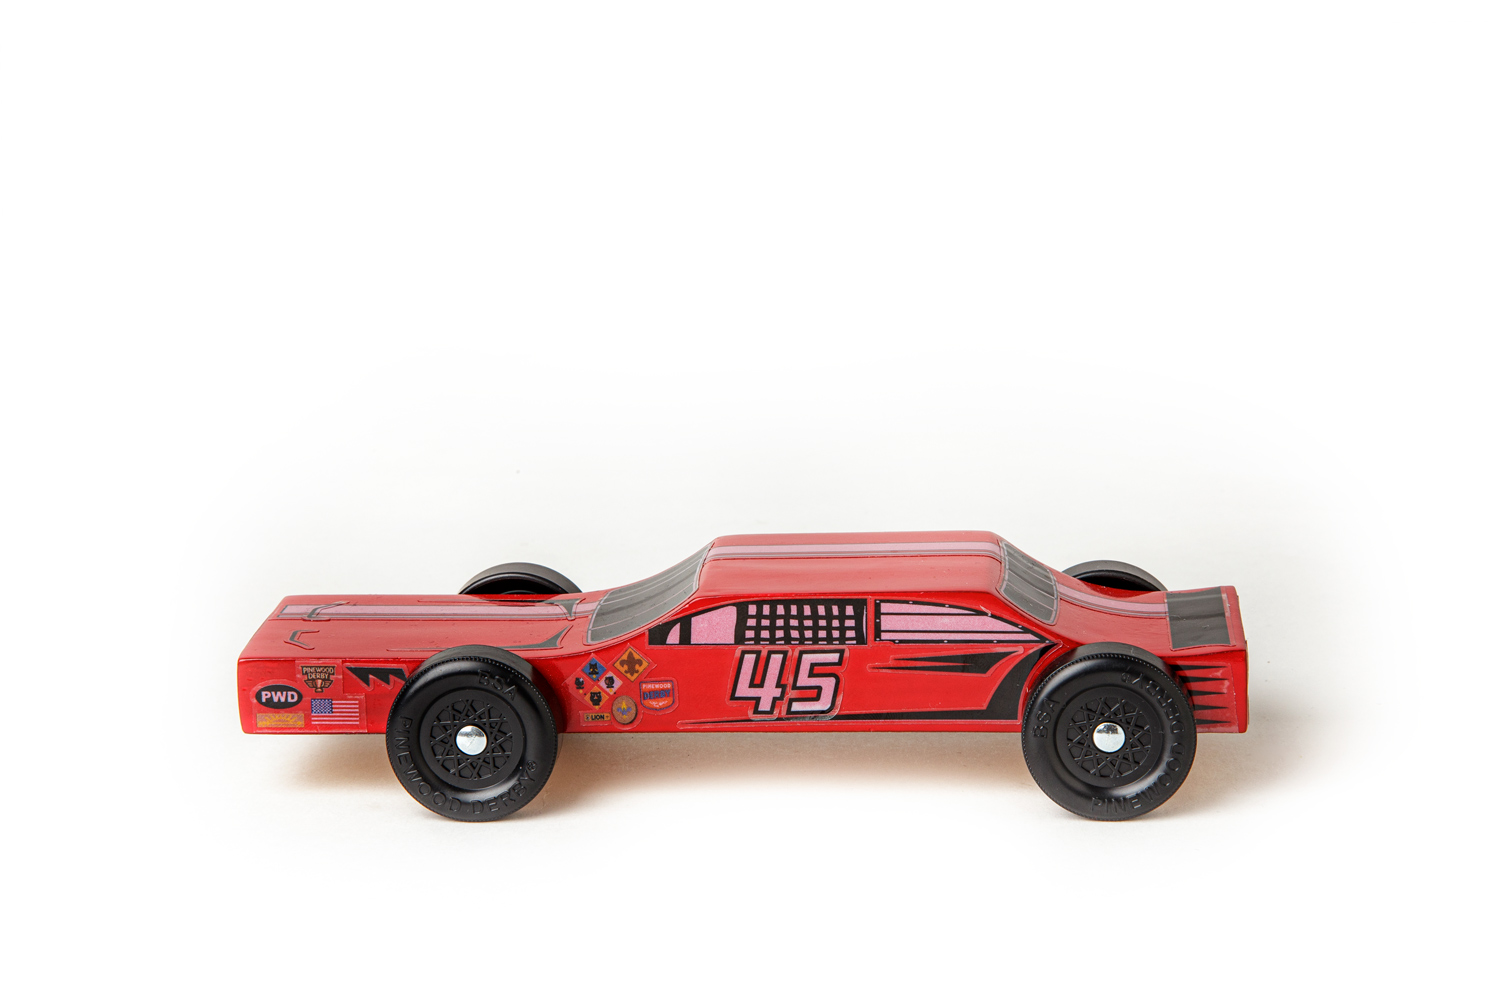 NEW Boy Scouts Official Grand Prix Pinewood Derby Racing Car Kit